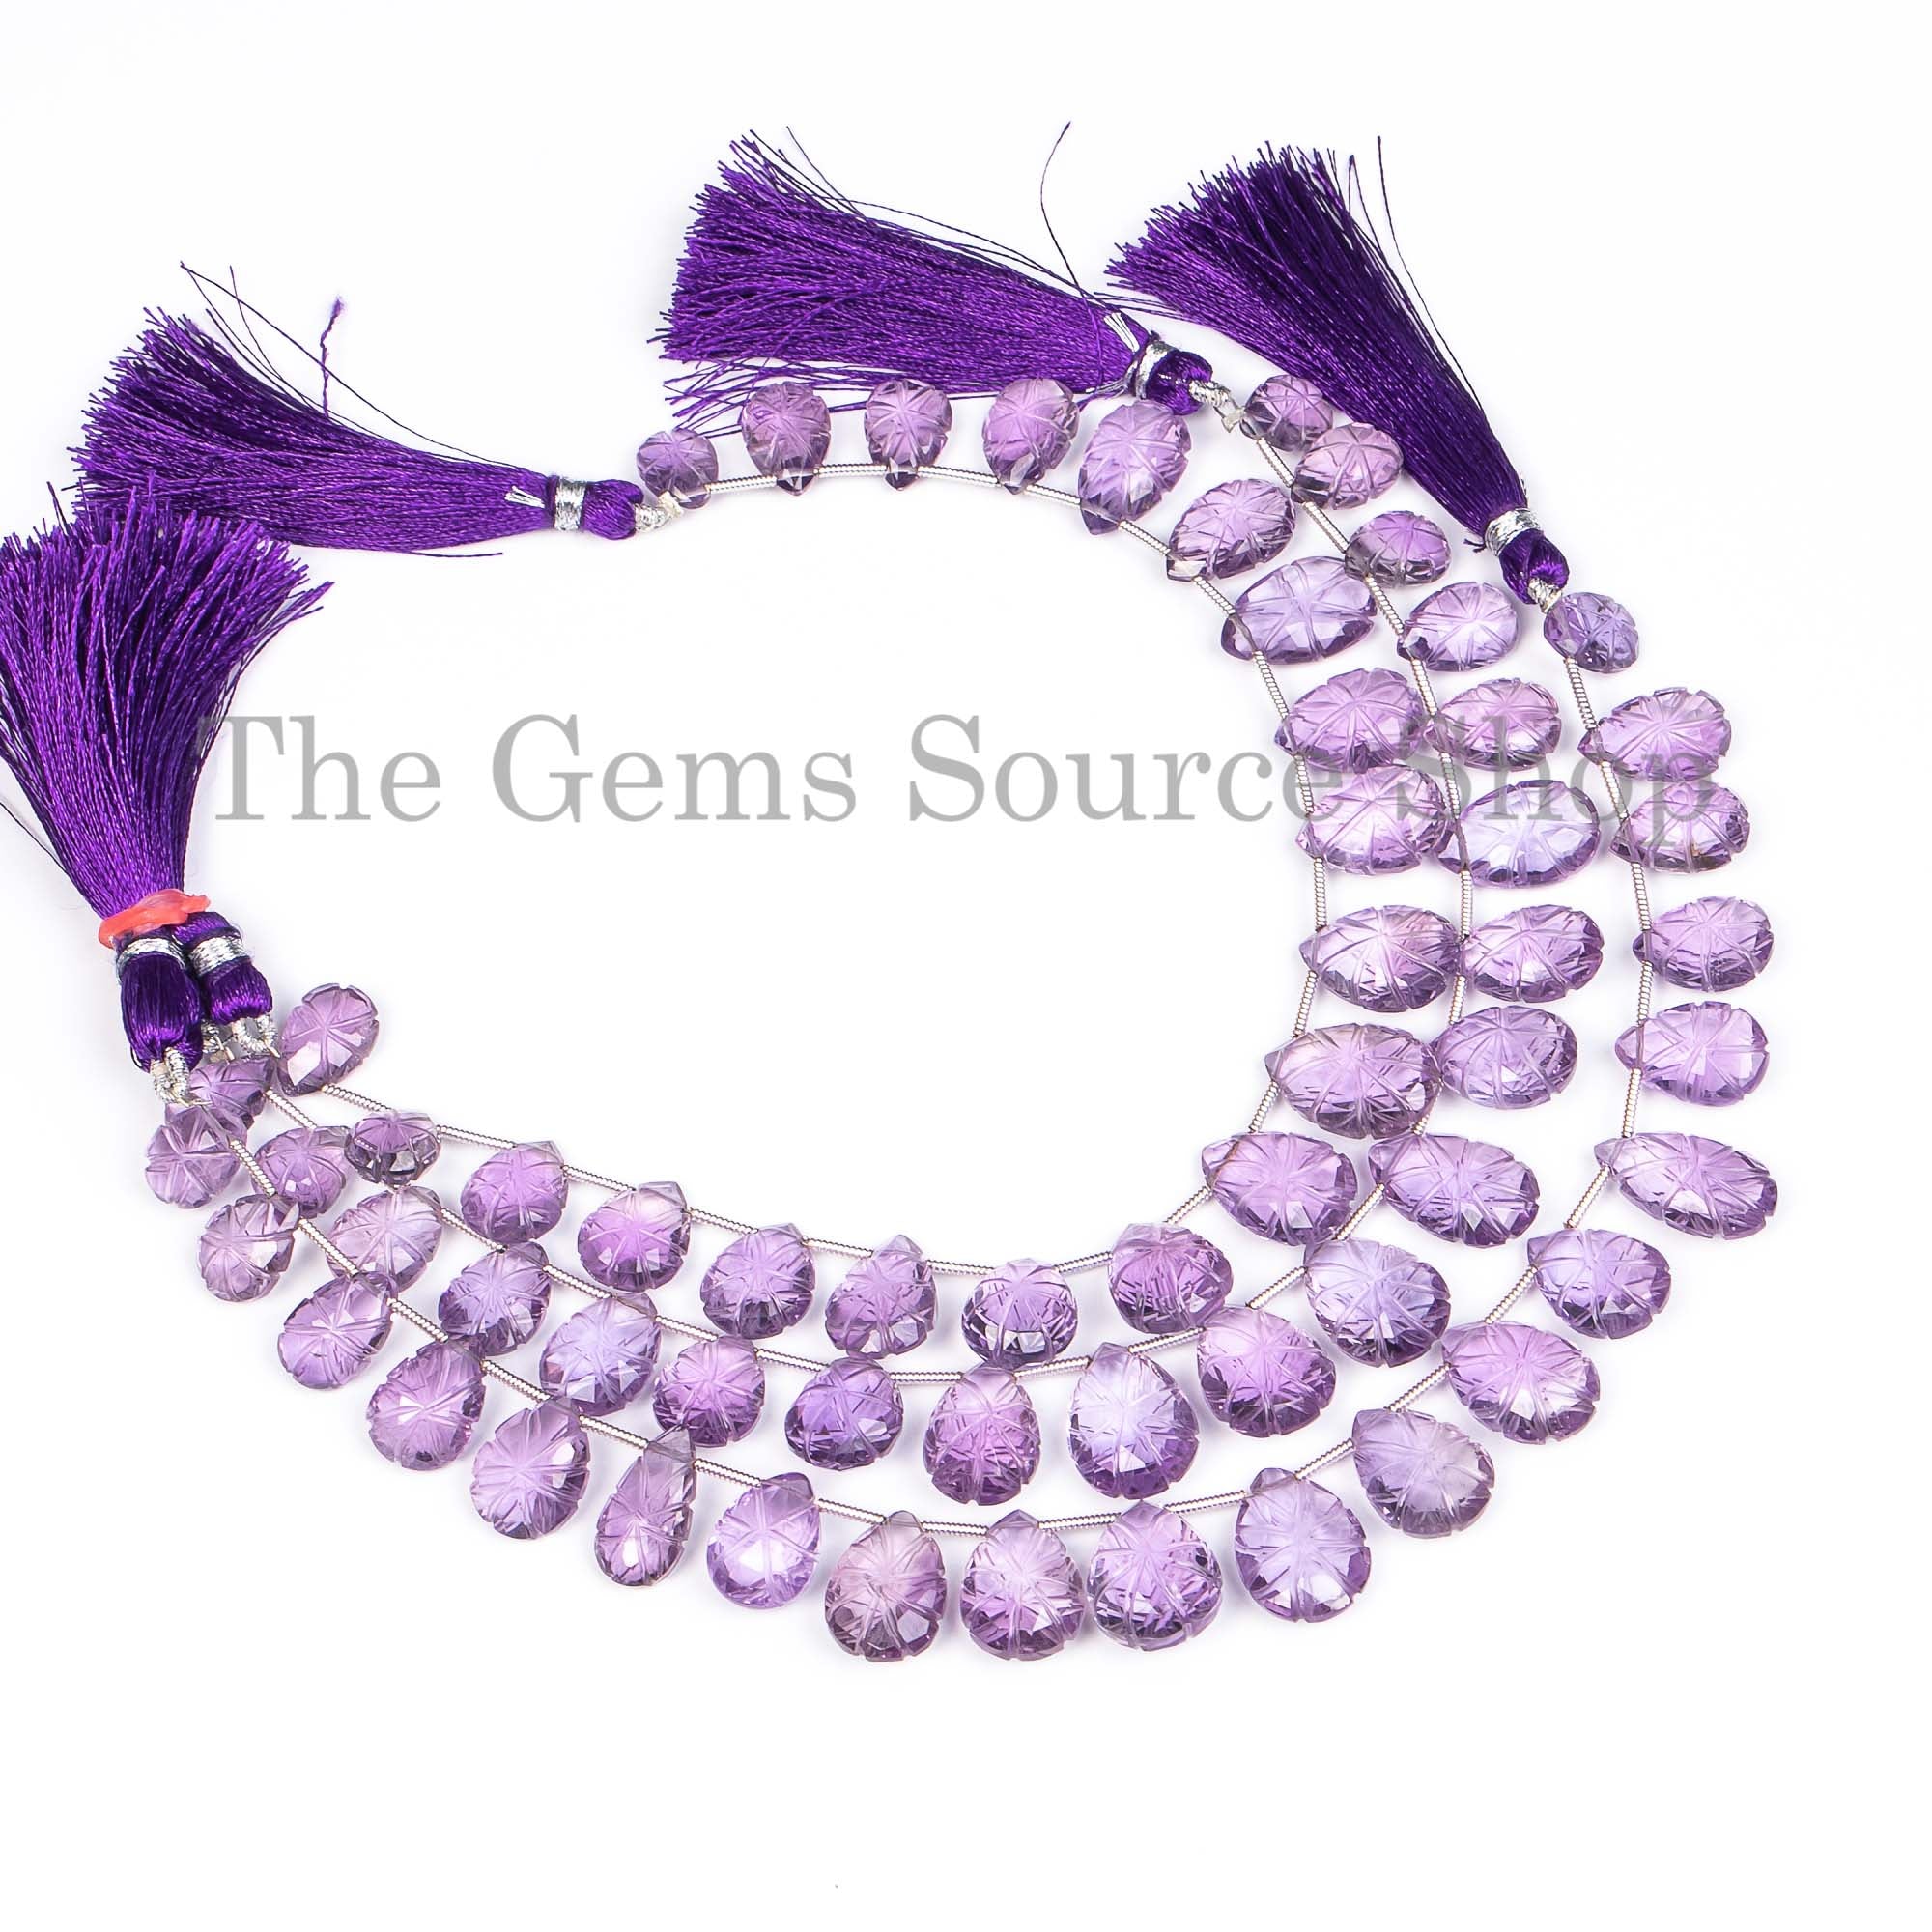 Natural Amethyst Pear Shape Flower Carving Beads, Amethyst Beads For Jewelry